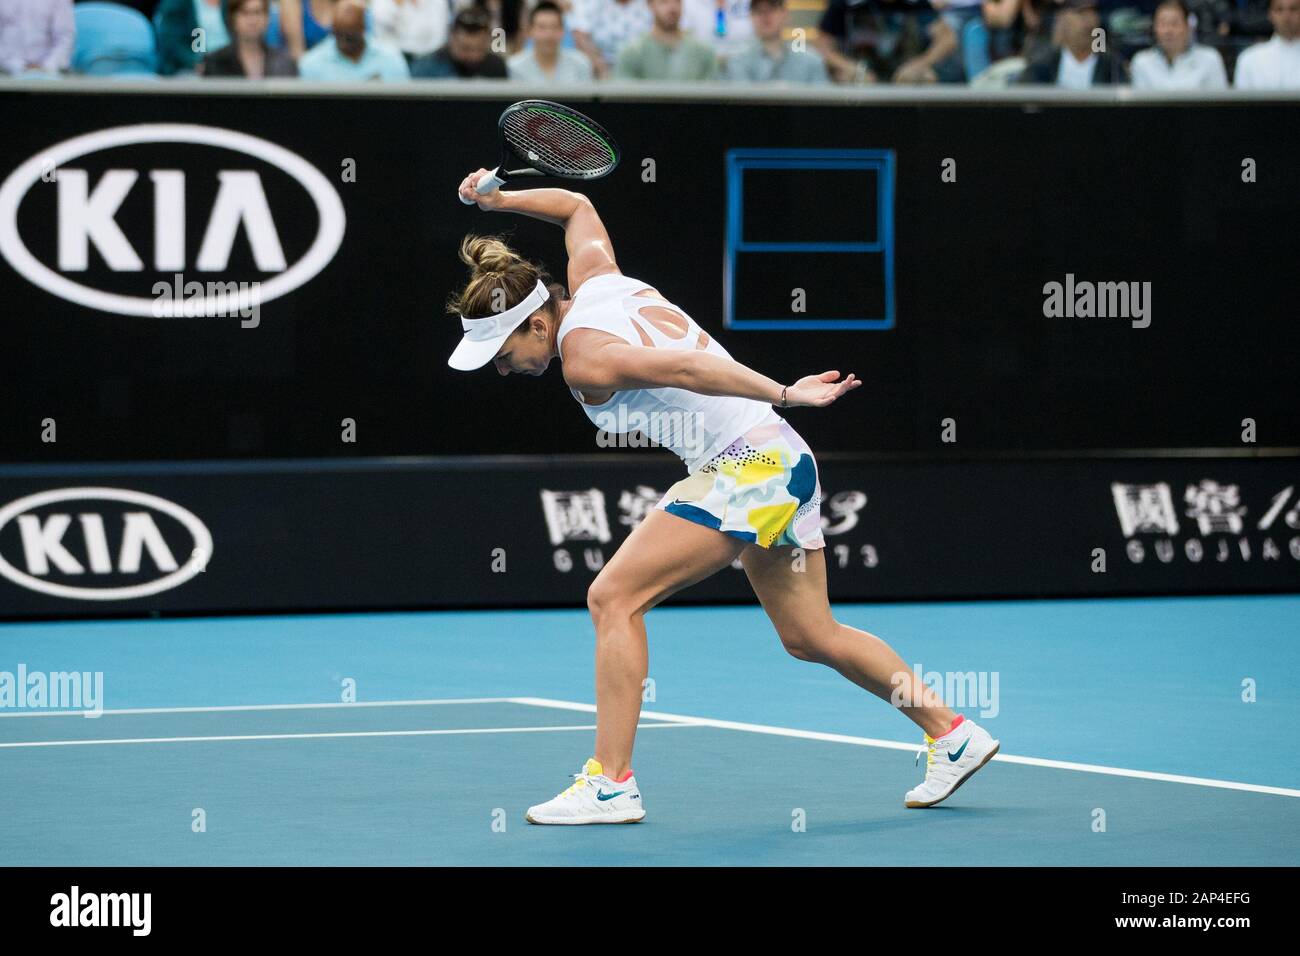 Melbourne, Australia. 21st Jan, 2020. Simona Halep of Romania fakes to  smash her racket in her match against Jenifer Brady of USA during the first  round match at the ATP Australian Open